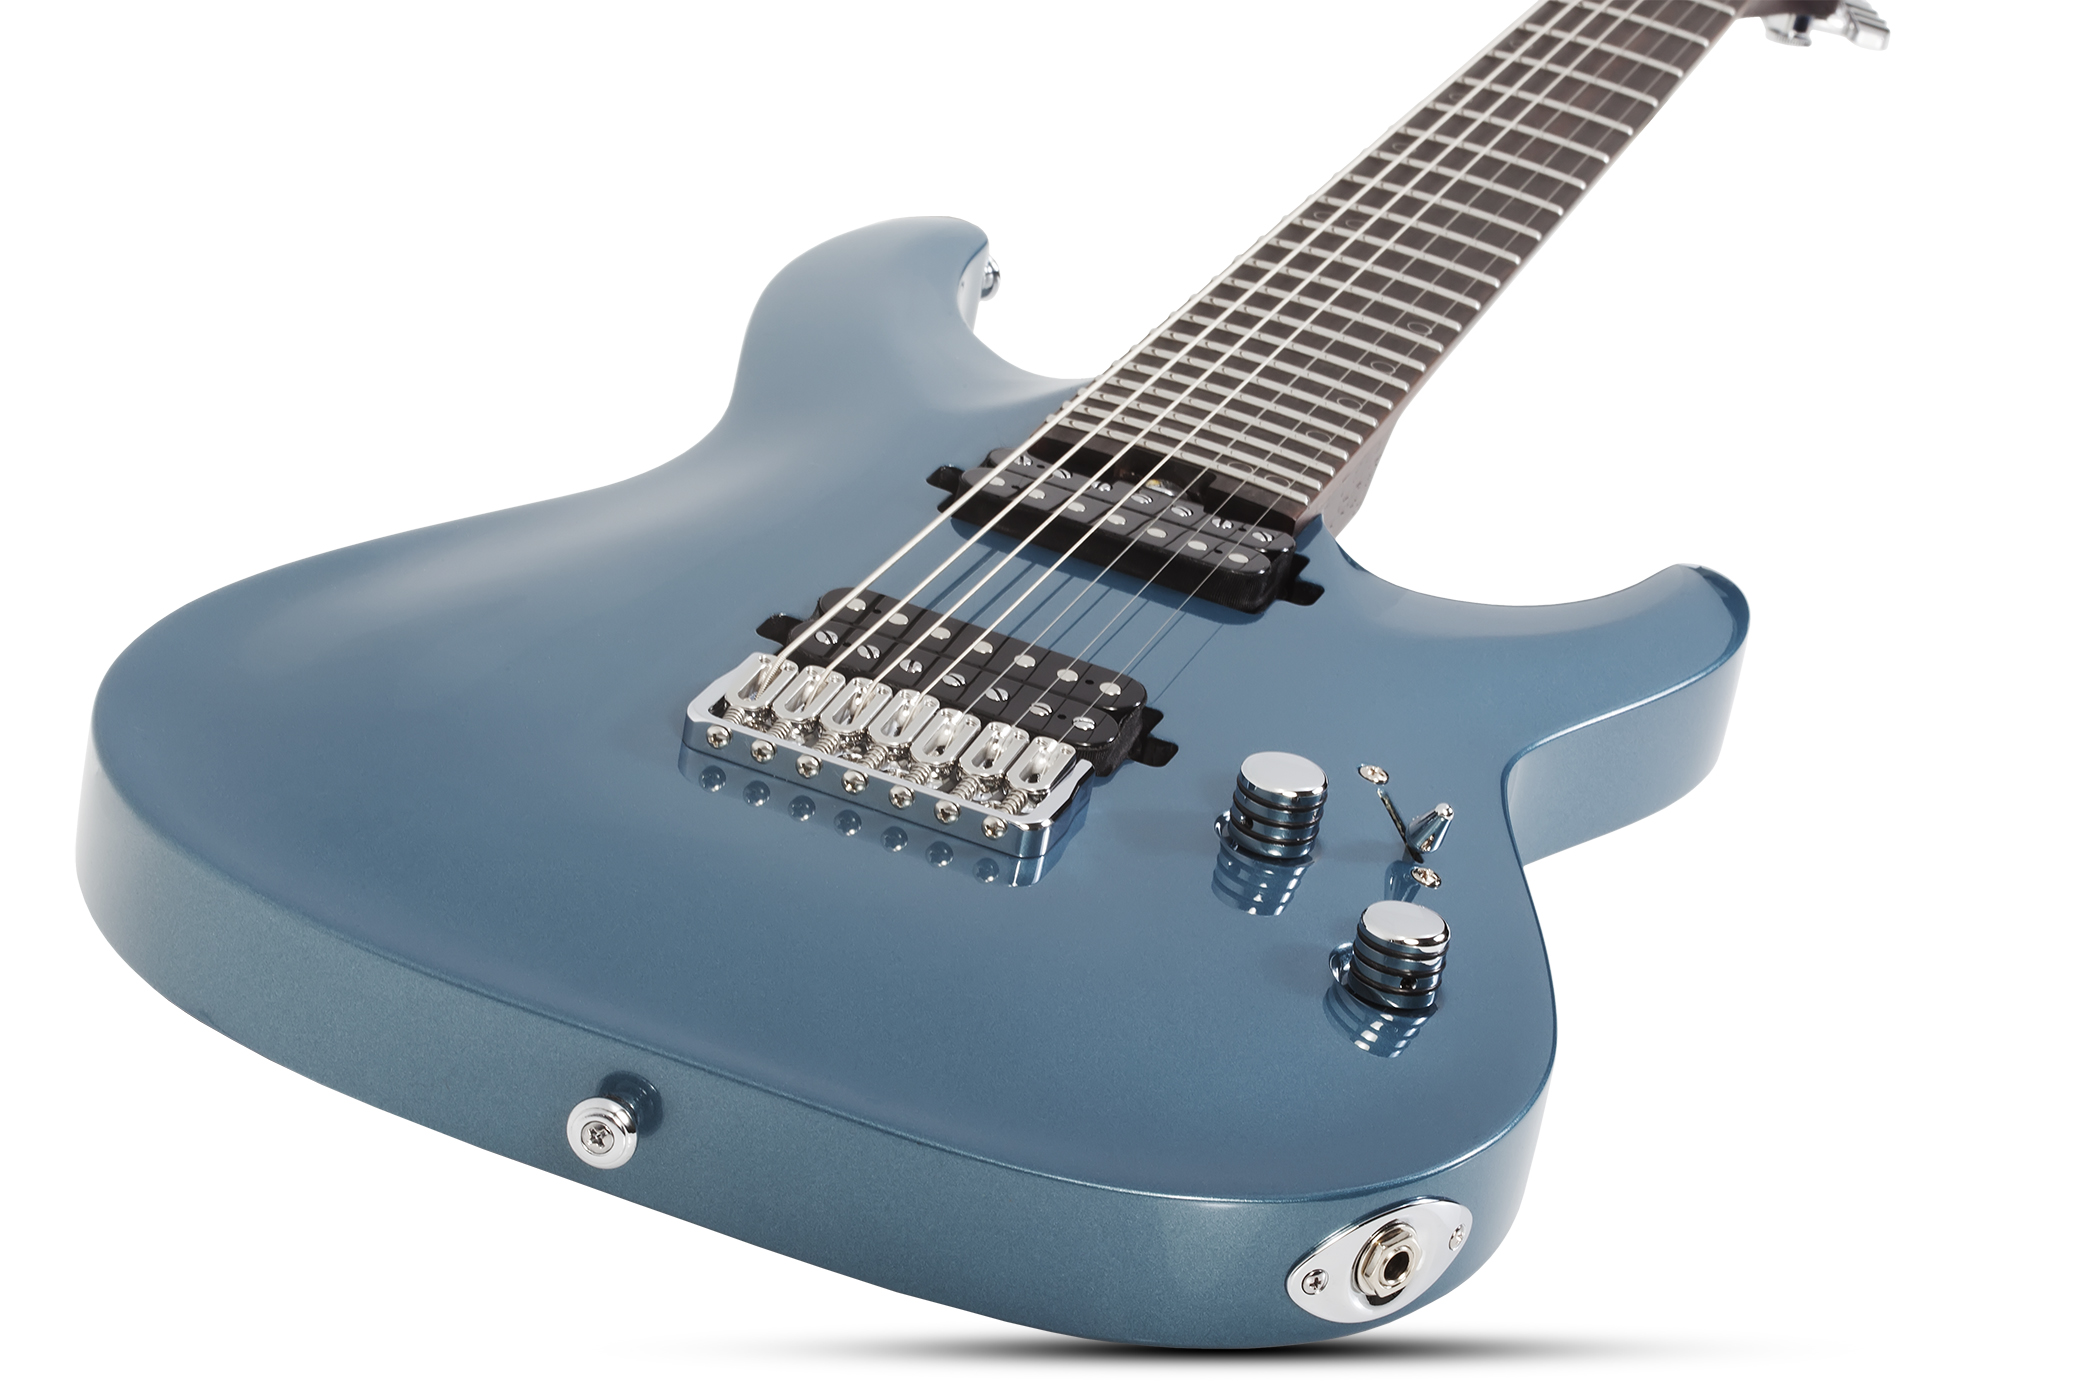 Schecter Aaron Marshall Am-7 Signature 2h Ht Eb - Cobalt Slate - 7 string electric guitar - Variation 1